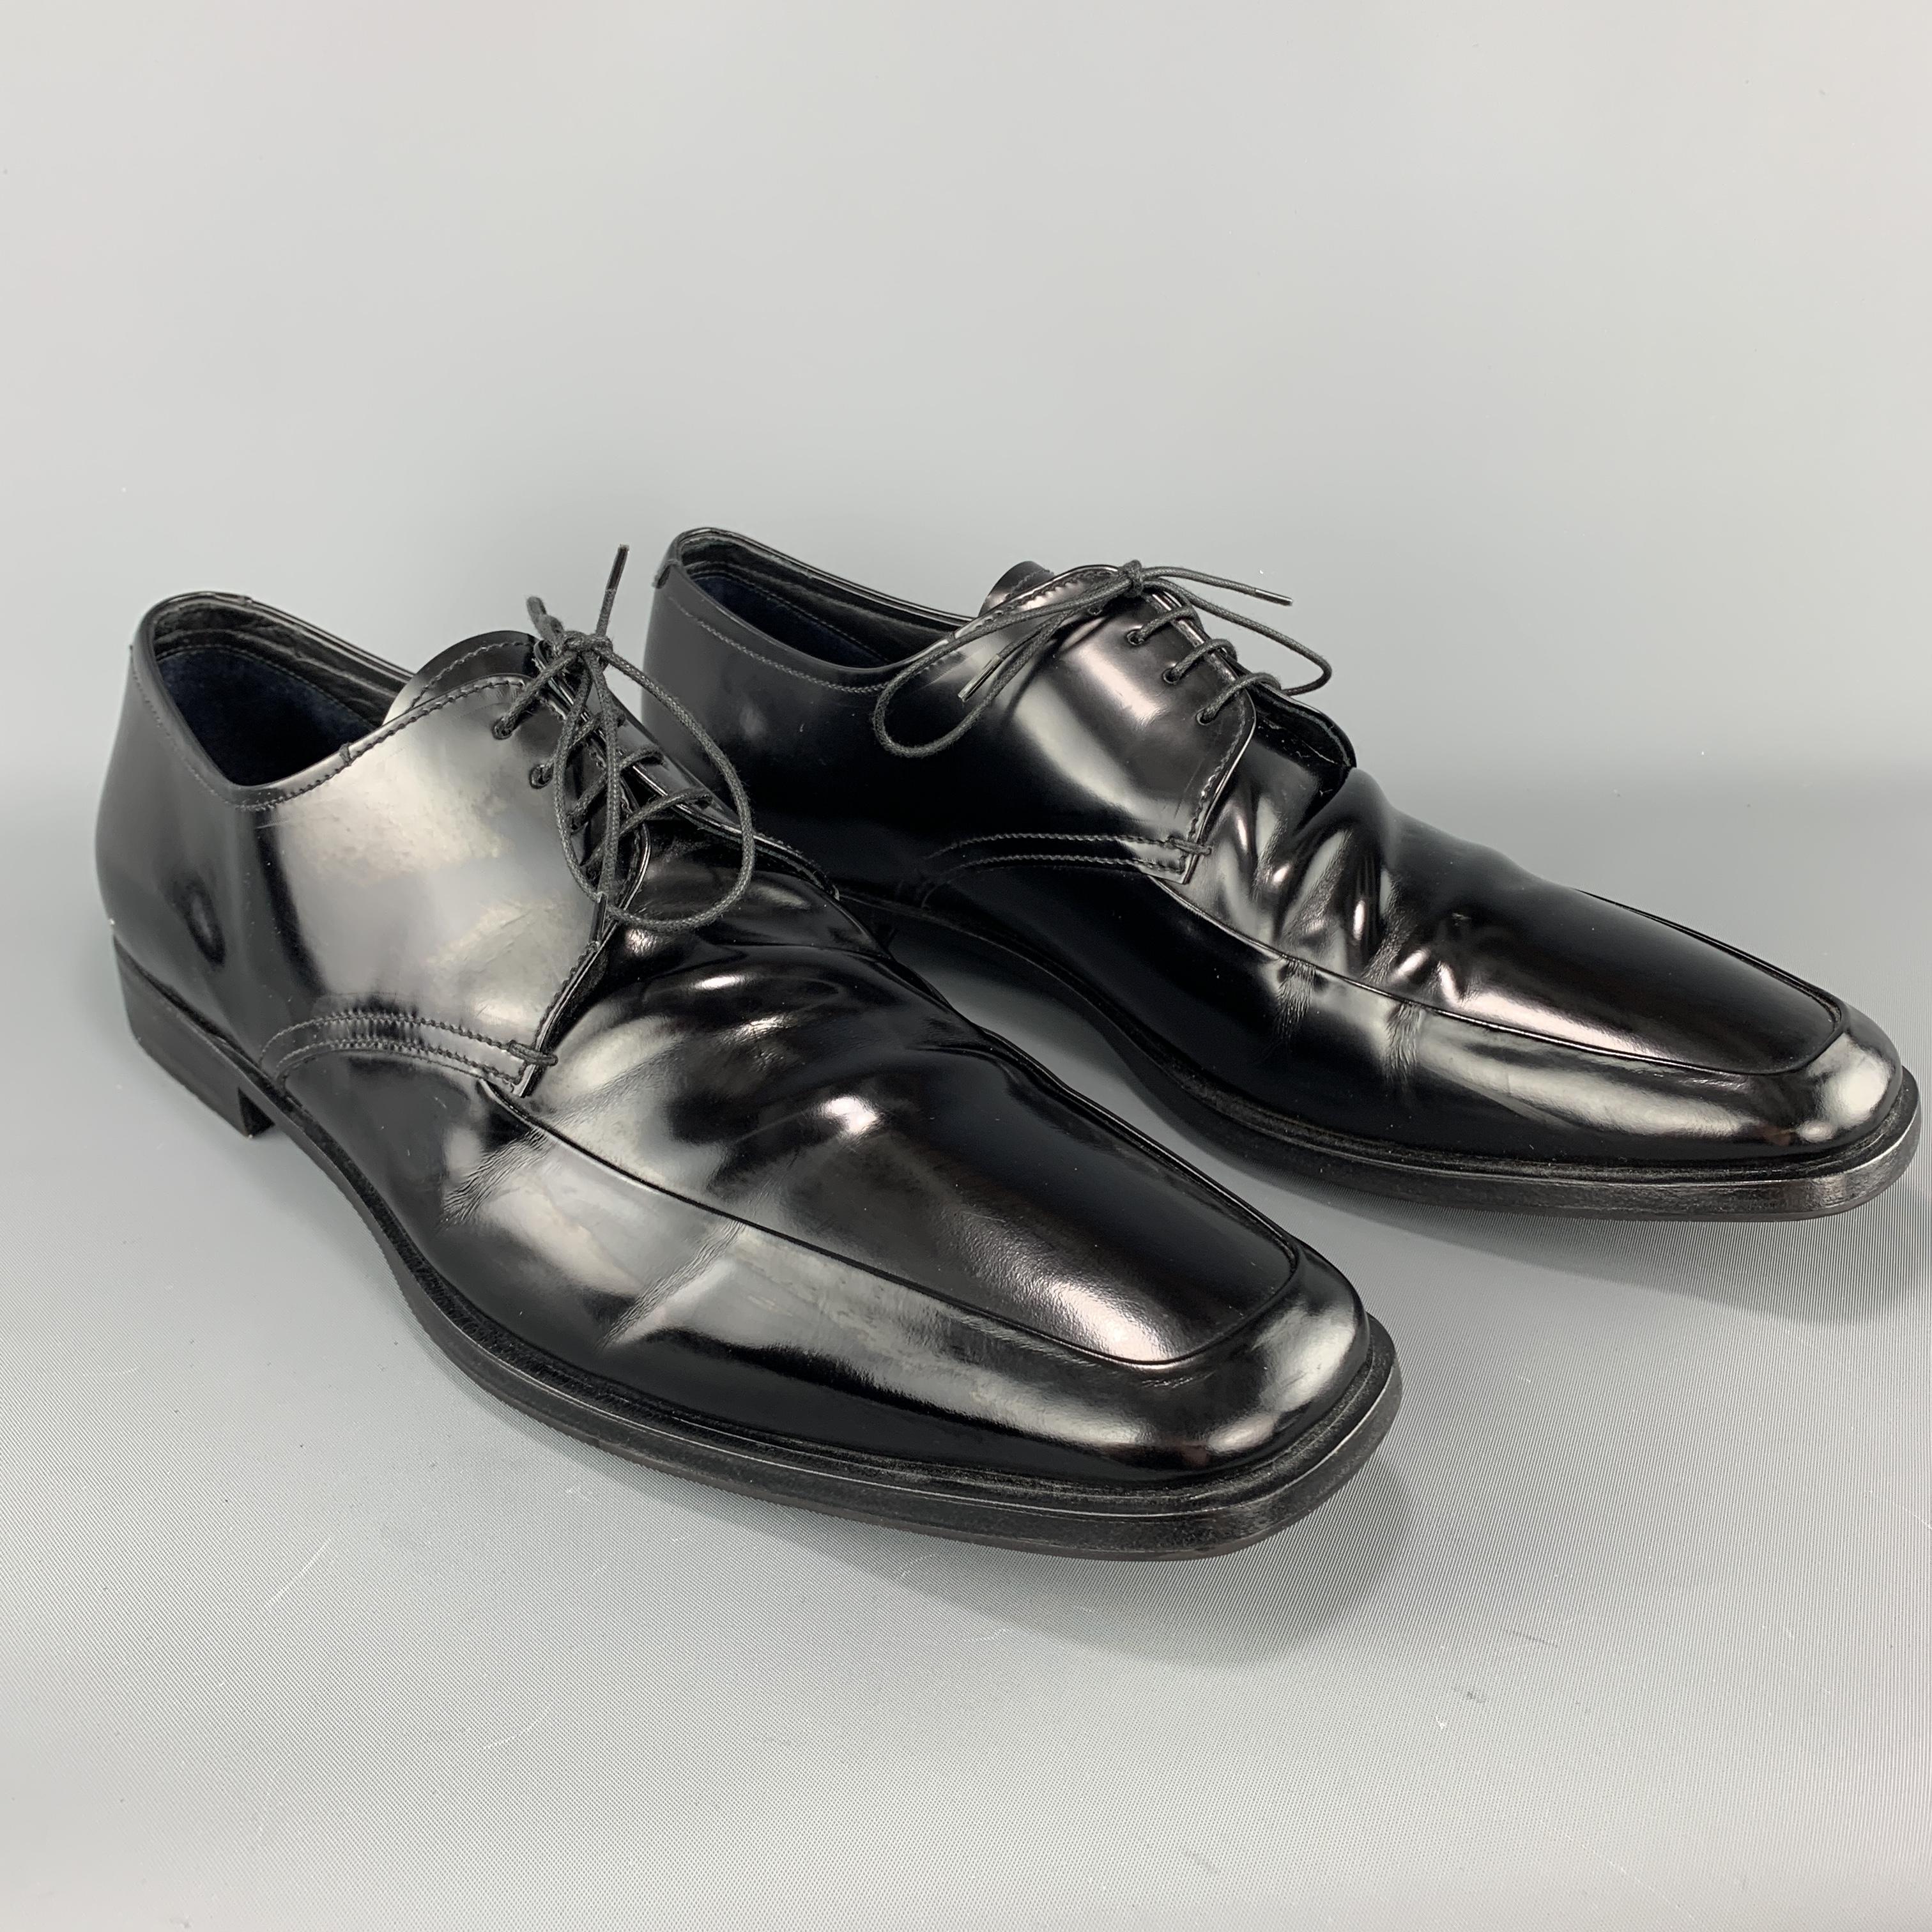 PRADA dress shoes come in shiny black leather with an apron toe. Made in Italy.

Good Pre-Owned Condition.
Marked: UK 11.5

Outsole: 13.25 x 4.25 in.